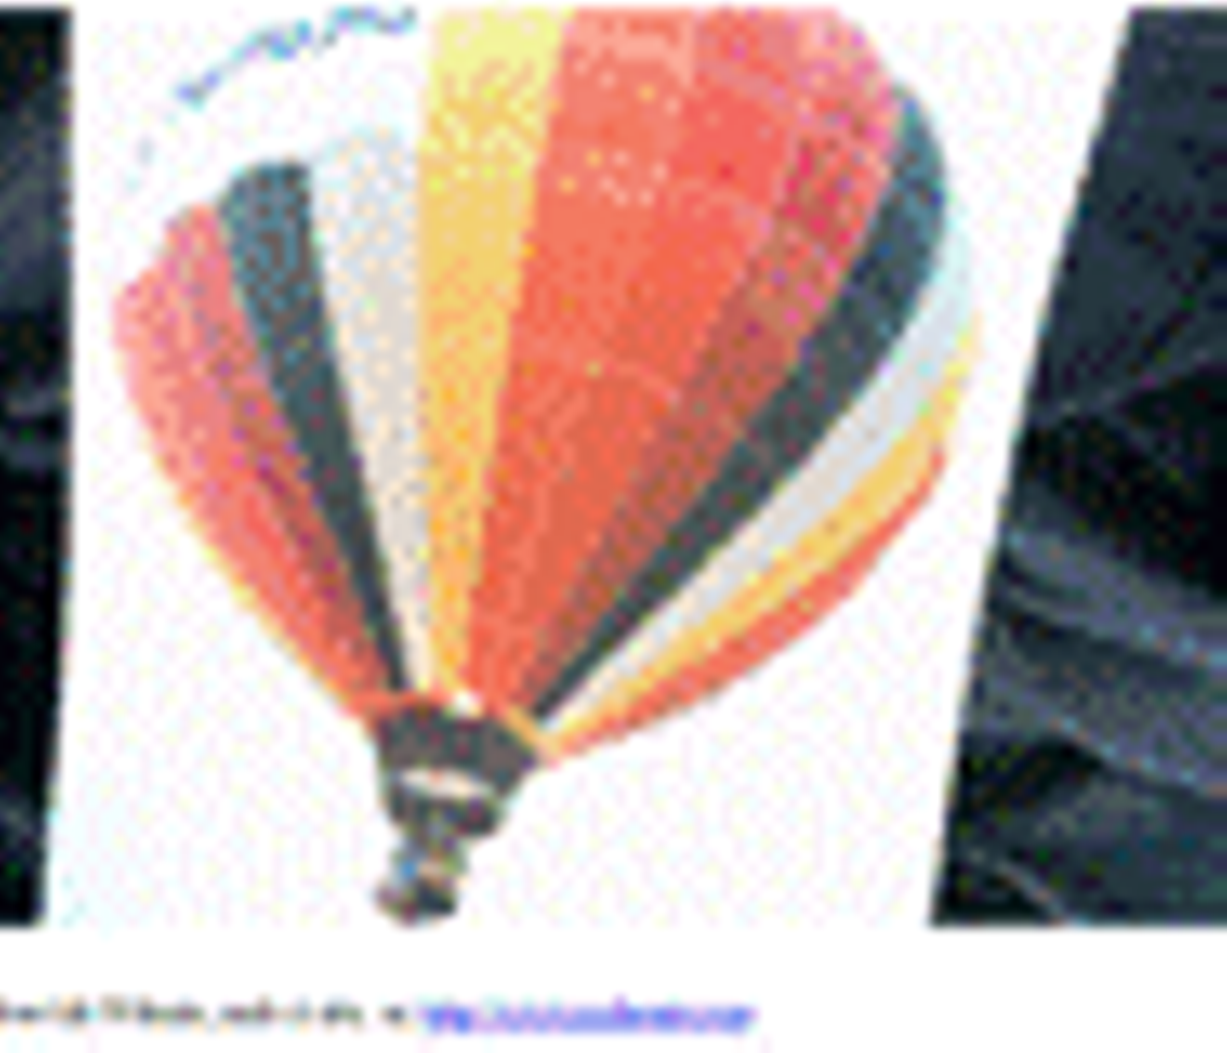 my-photo-of-a-hot-air-balloon-with-red-white-yellow-and-black--verticle-stripes--and-a-flame-shooting-up-inside-the-balloon-can-be-seen"